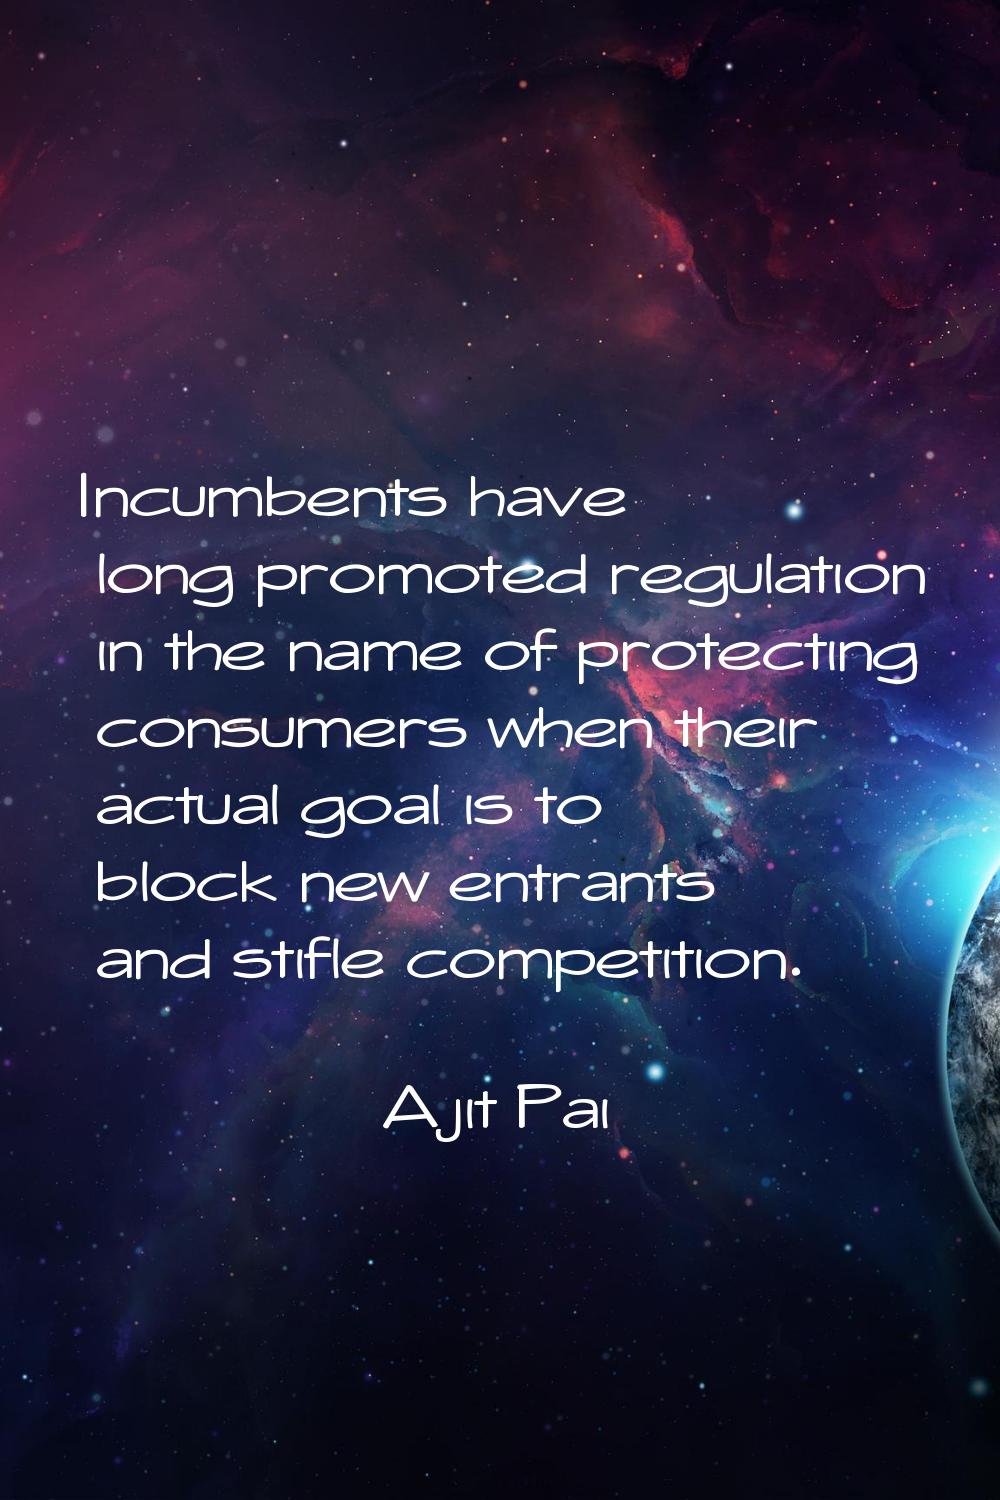 Incumbents have long promoted regulation in the name of protecting consumers when their actual goal